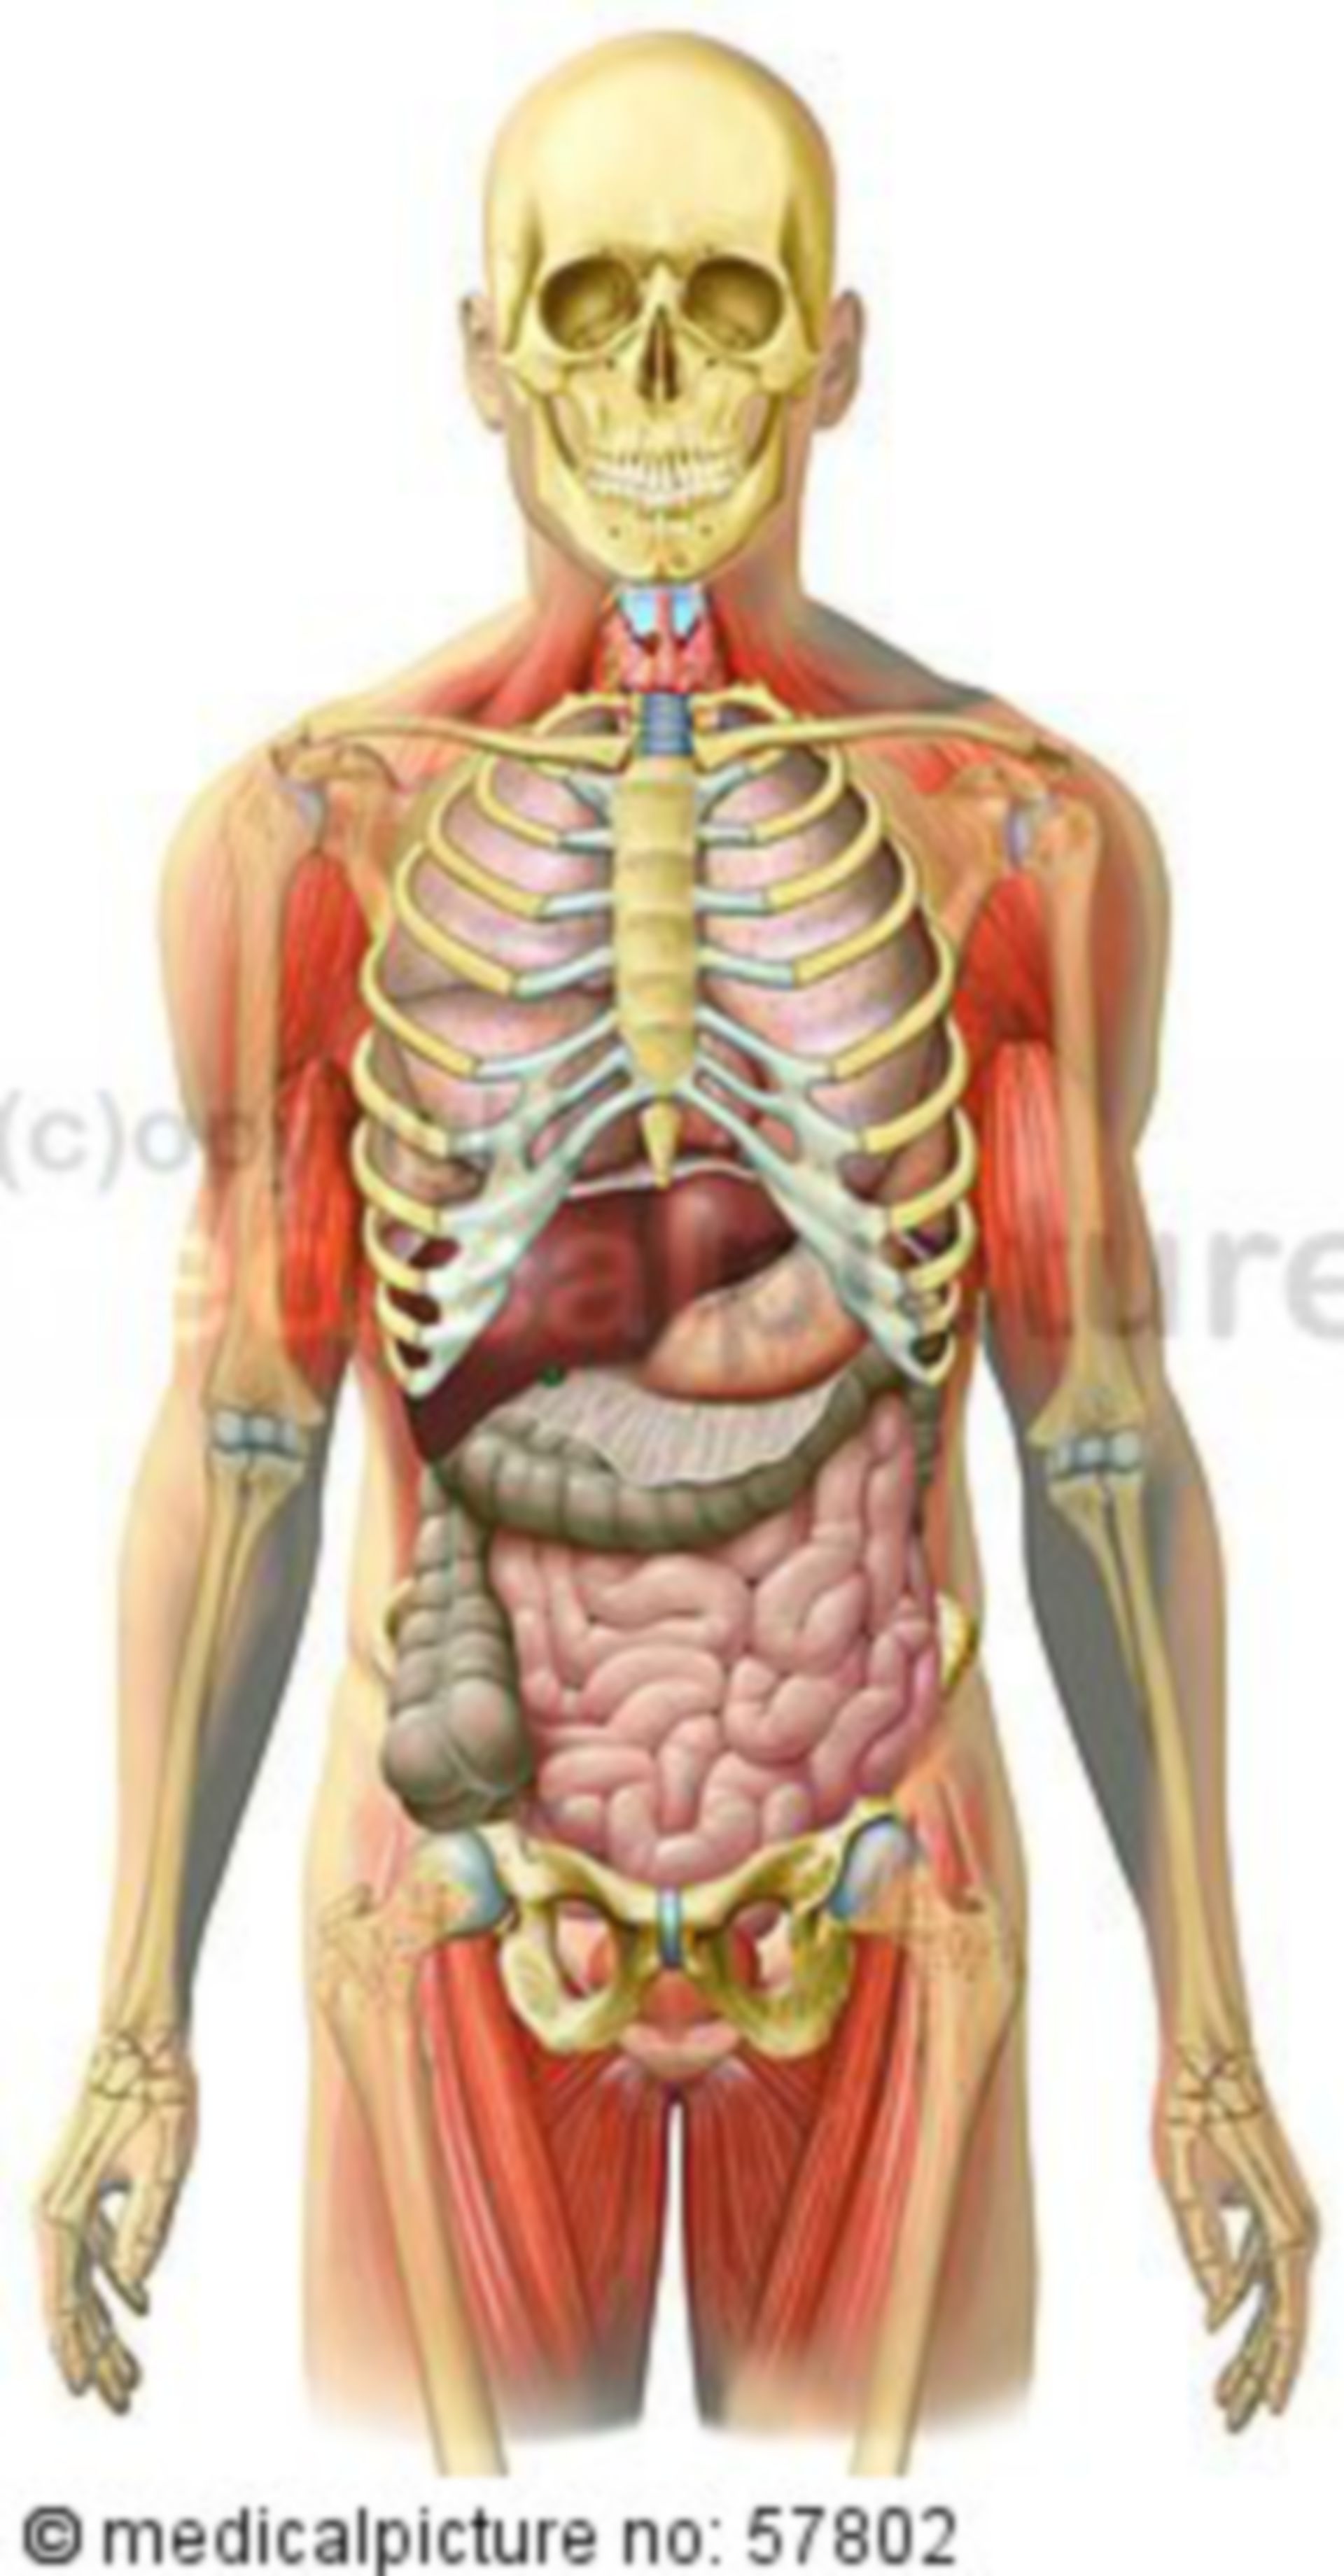 Anatomical illustrations - skeleton with pectoral, abdominal, & and pelvic intestines, skeletal muscles